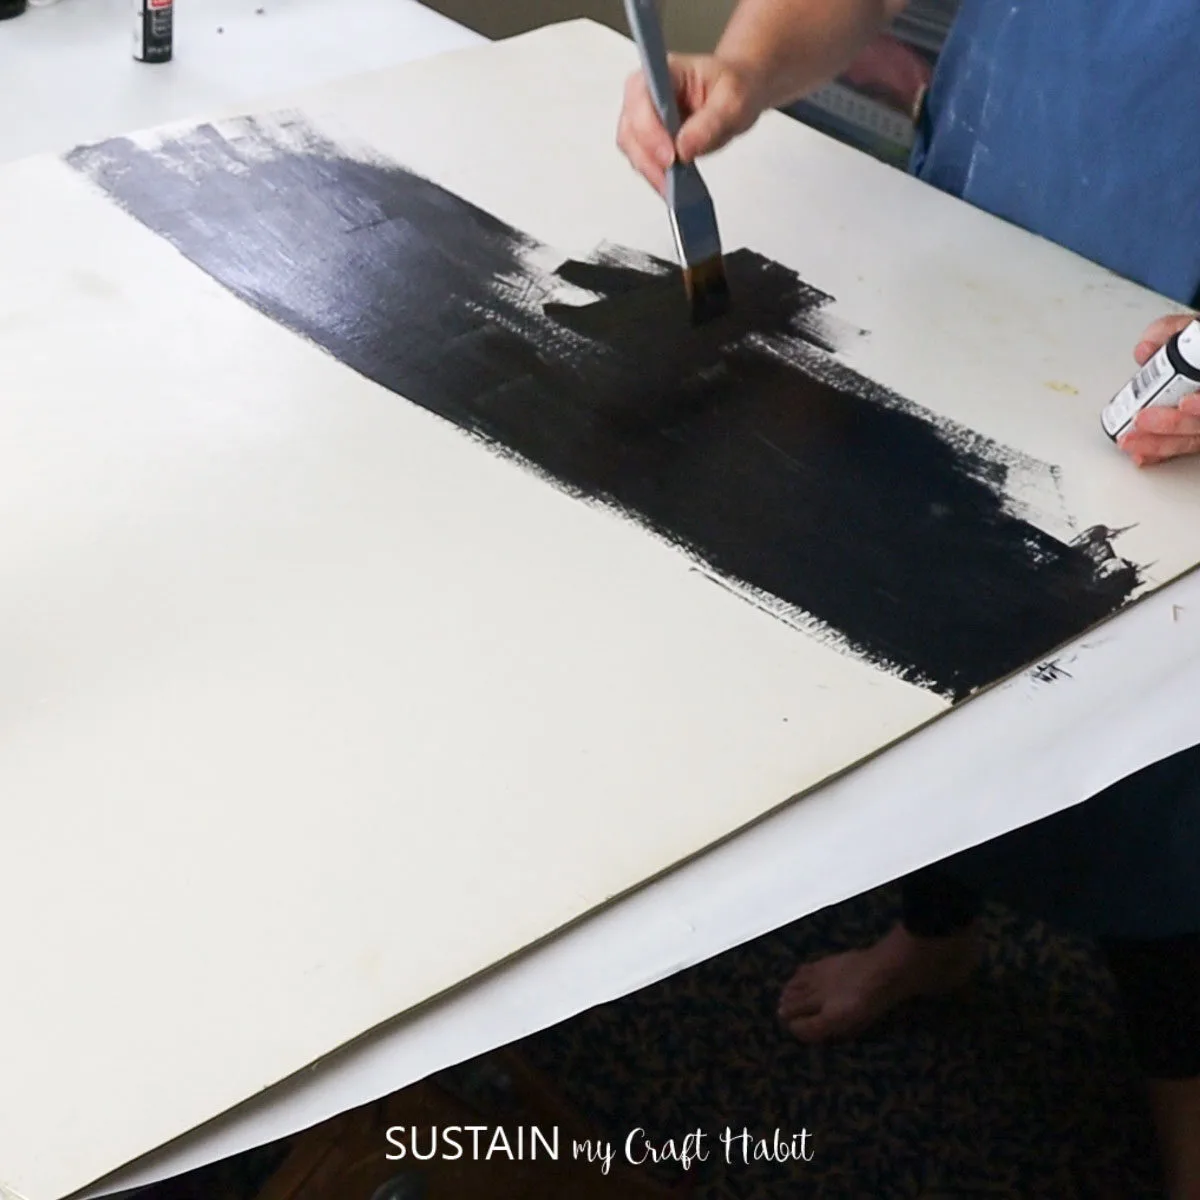 Painting with chalkboard paint.